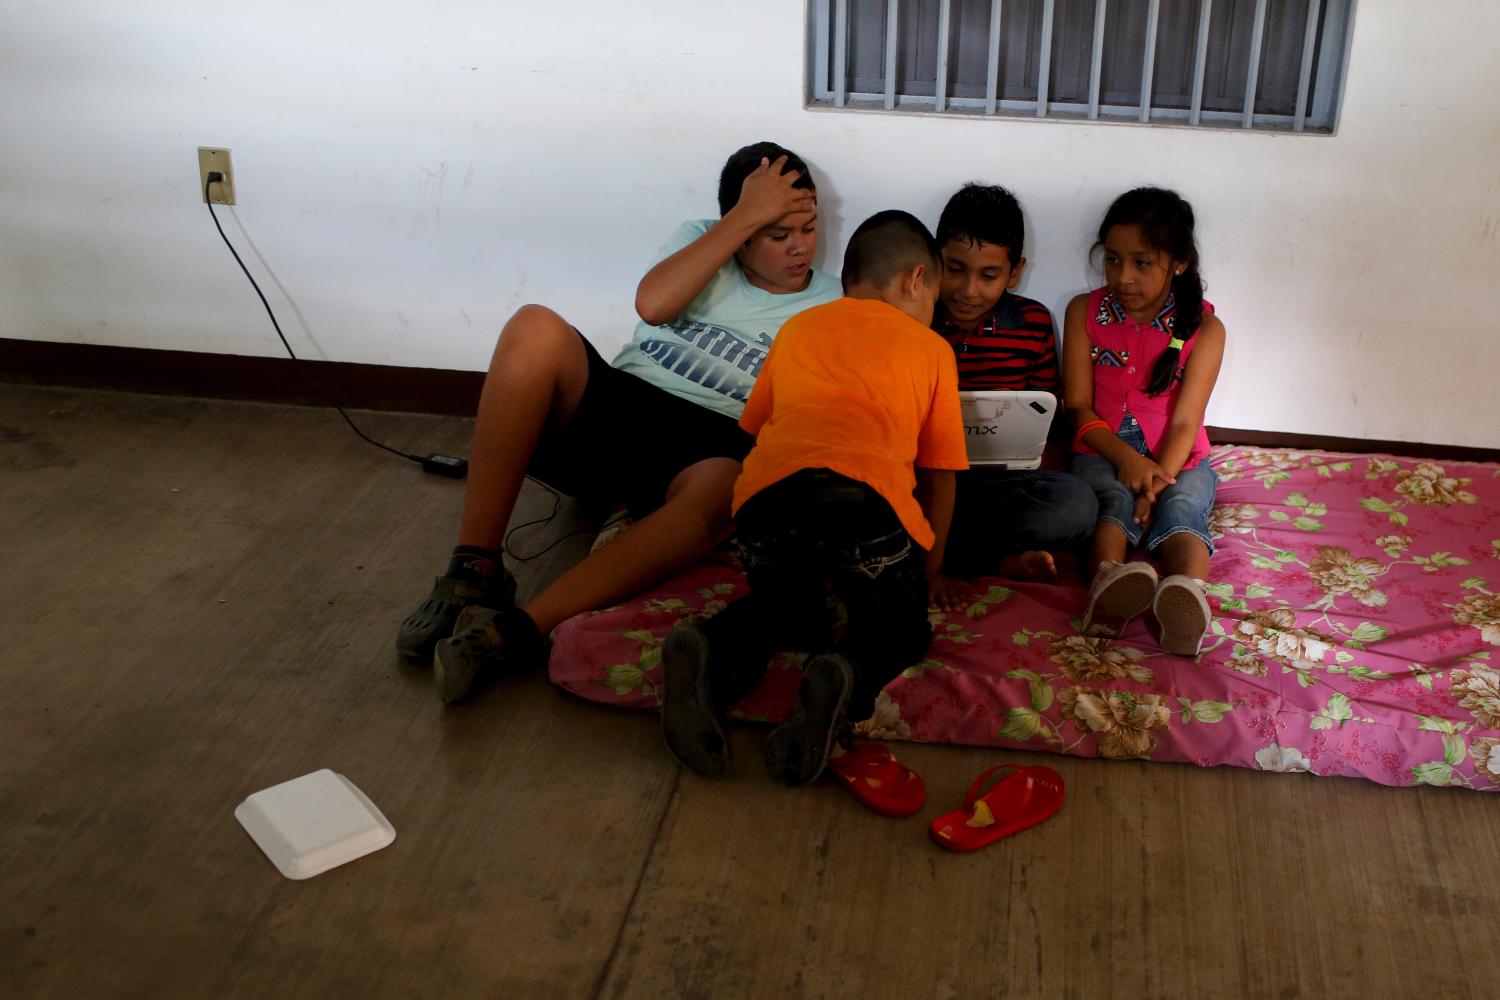 Children watch a movie on a computer at a shelter in the town of Comala, in the Mexican state of Colima, October 24, 2015. Hurricane Patricia caused less damage than feared on Mexico's Pacific coast on Saturday, but hammered an isolated part of the shoreline dotted with luxury villas and fishing villages, where the storm and its 165 mph (266 kph) winds landed. Thousands of residents and tourists fled the advance of the storm, one of the strongest in recorded history, seeking refuge in hastily arranged shelters. REUTERS/Tomas Bravo